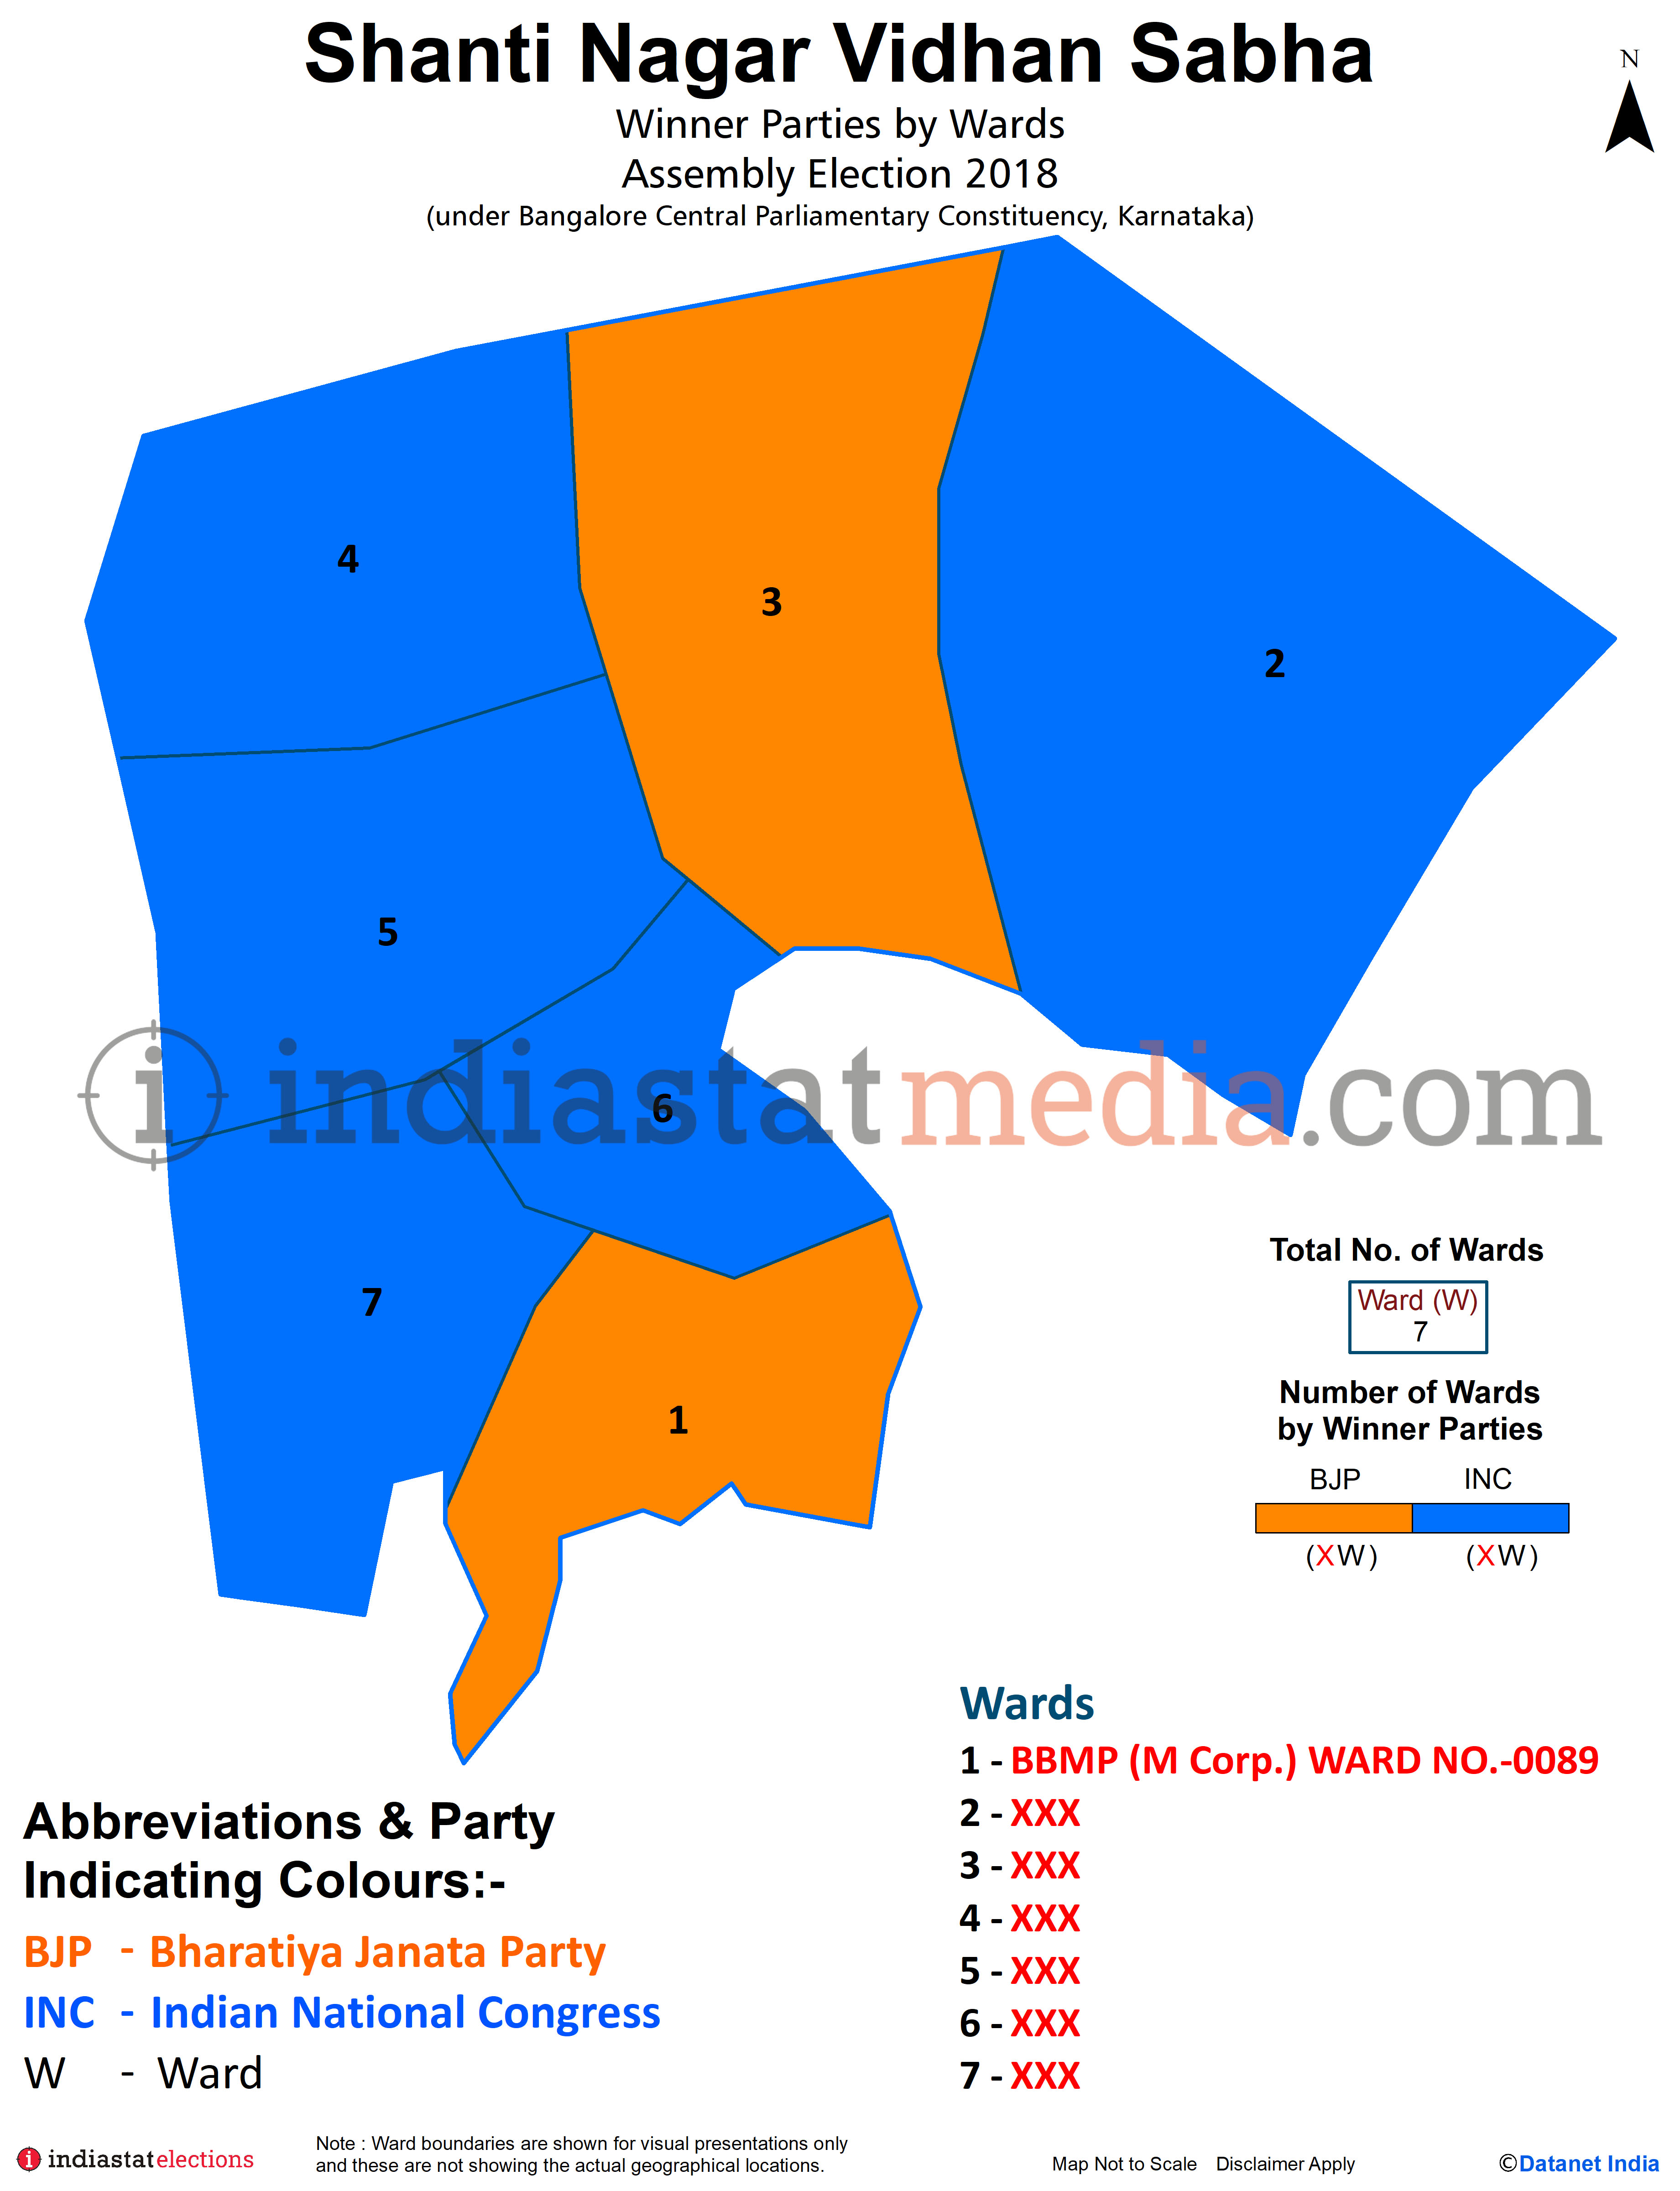 Winner Parties by Ward in Shanti Nagar Assembly Constituency under Bangalore Central Parliamentary Constituency in Karnataka (Assembly Election - 2018)